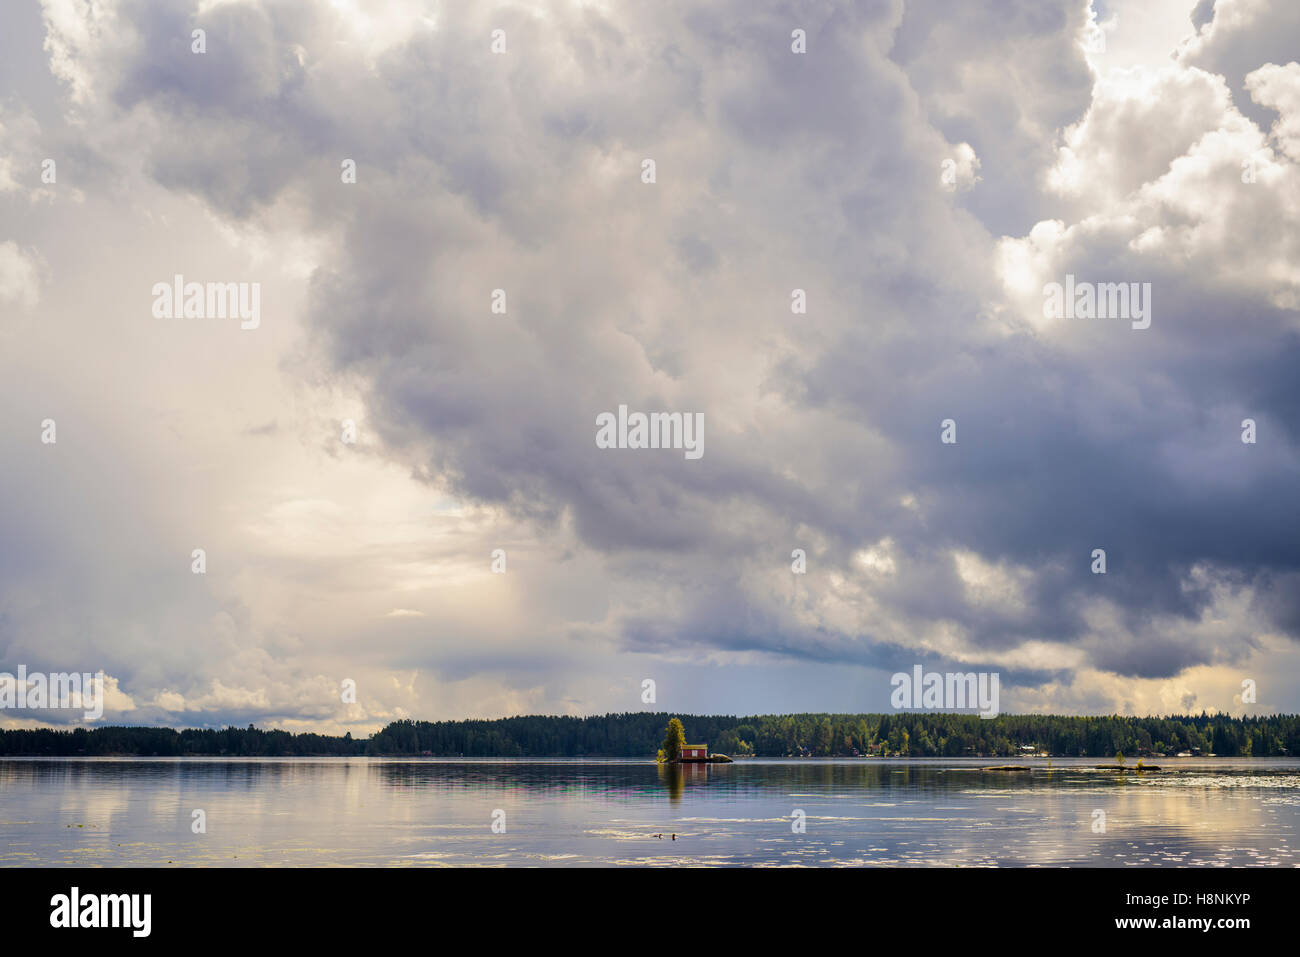 Lake among forests with little house on island Stock Photo